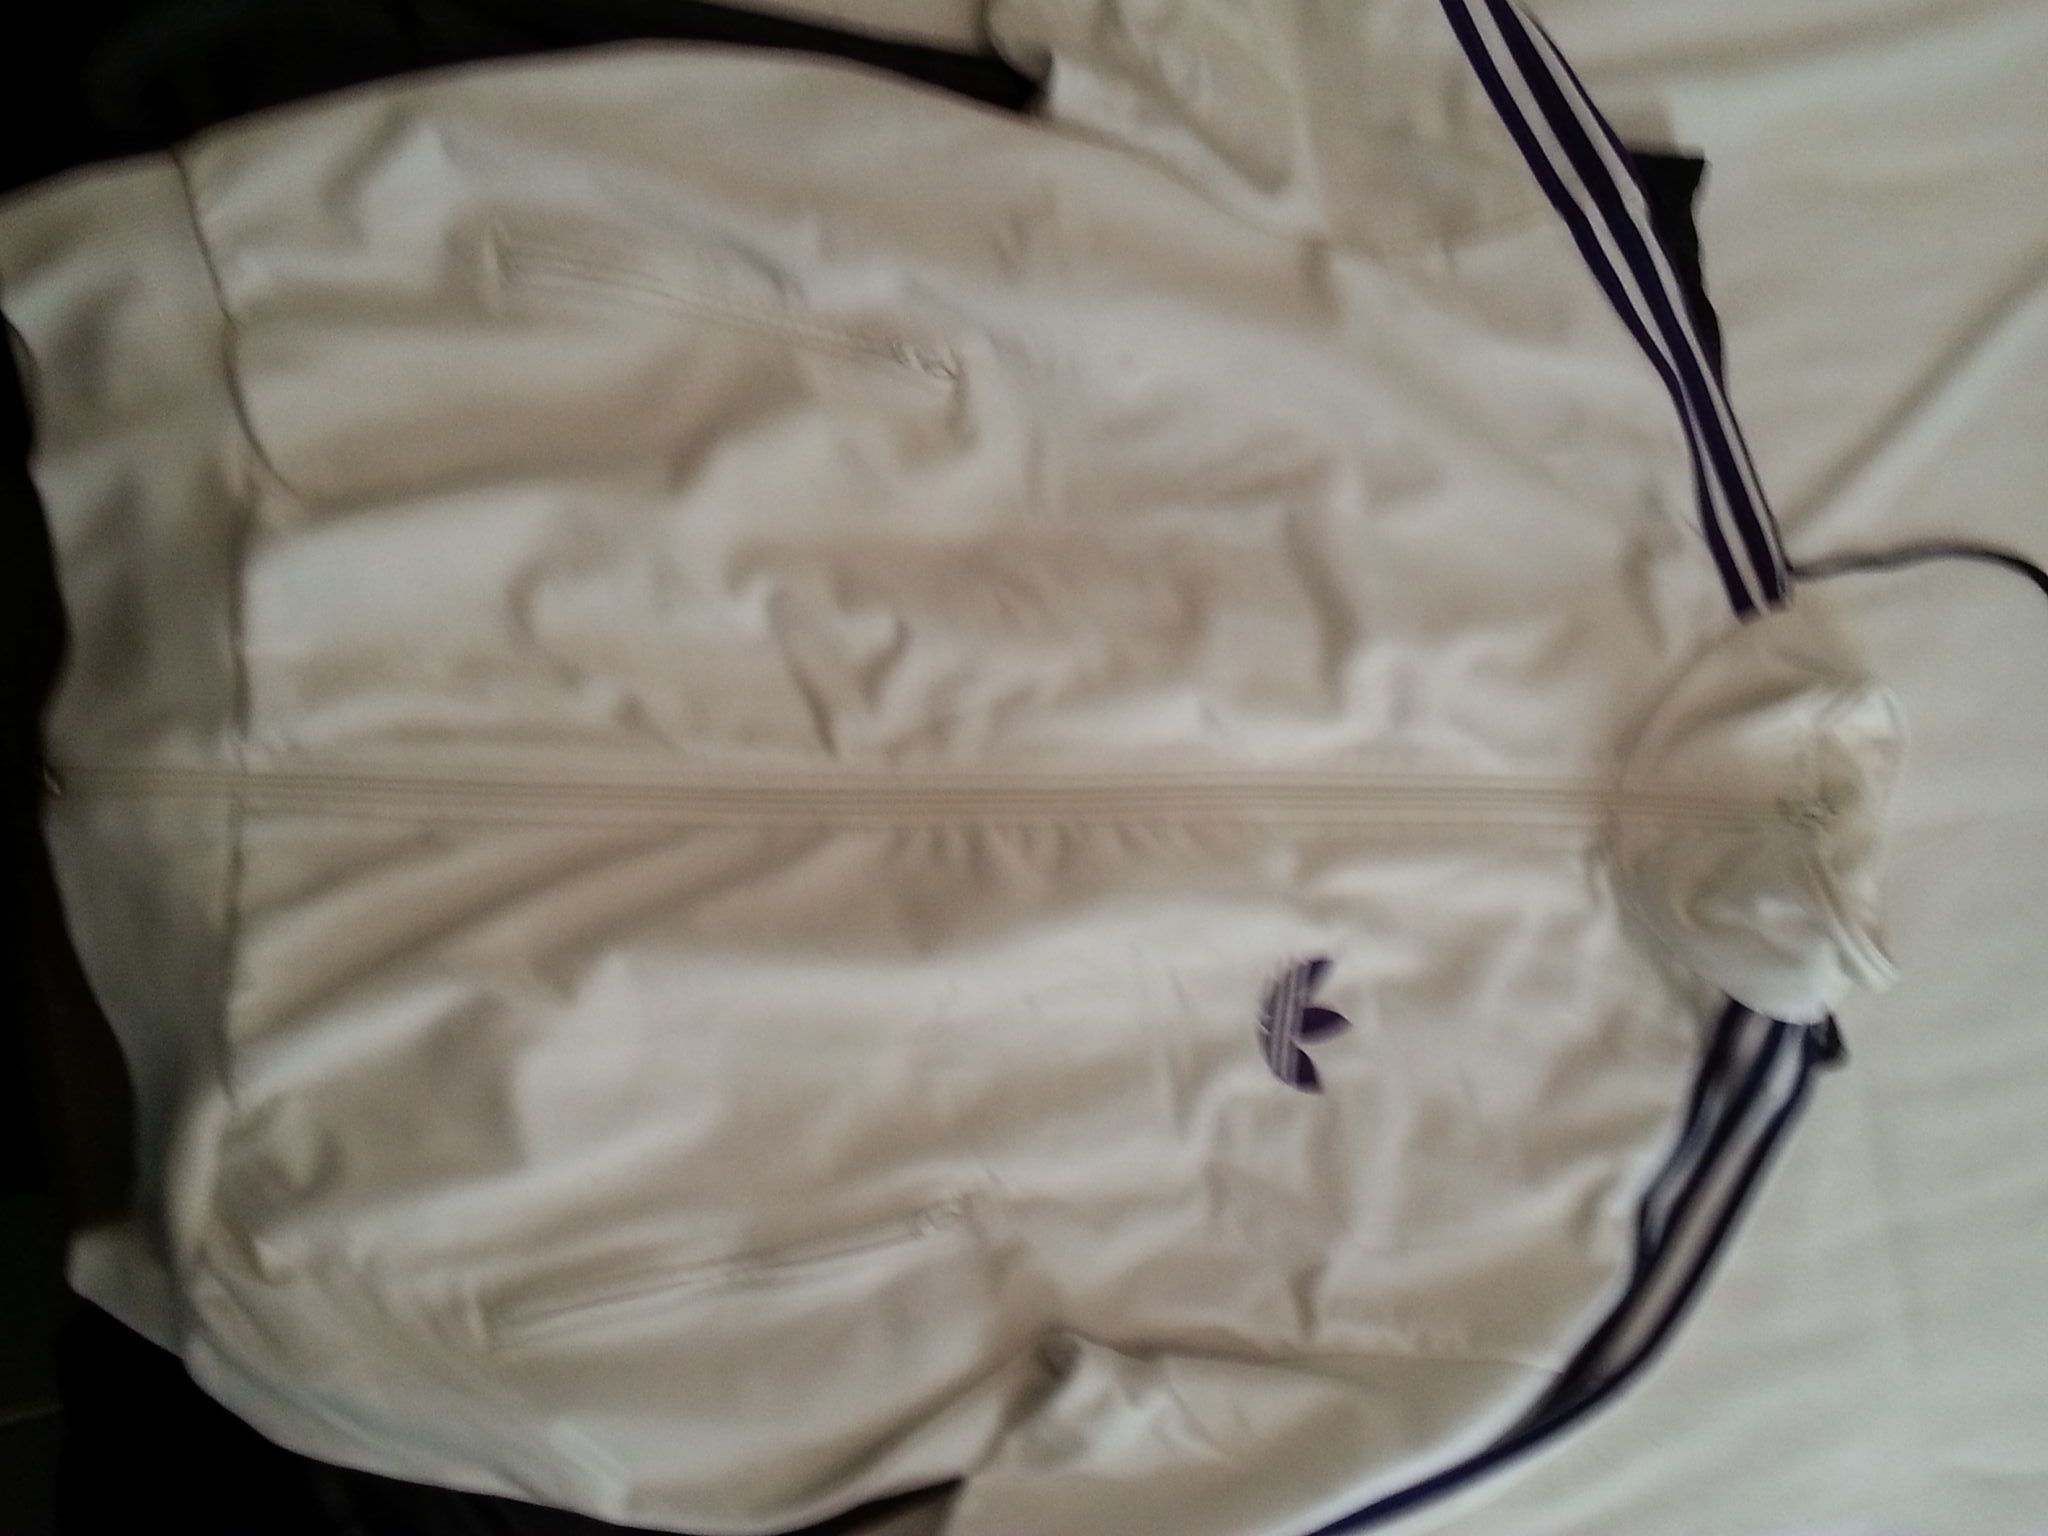 Adidas Superstar Jacket size L - White and Purple - not shiny